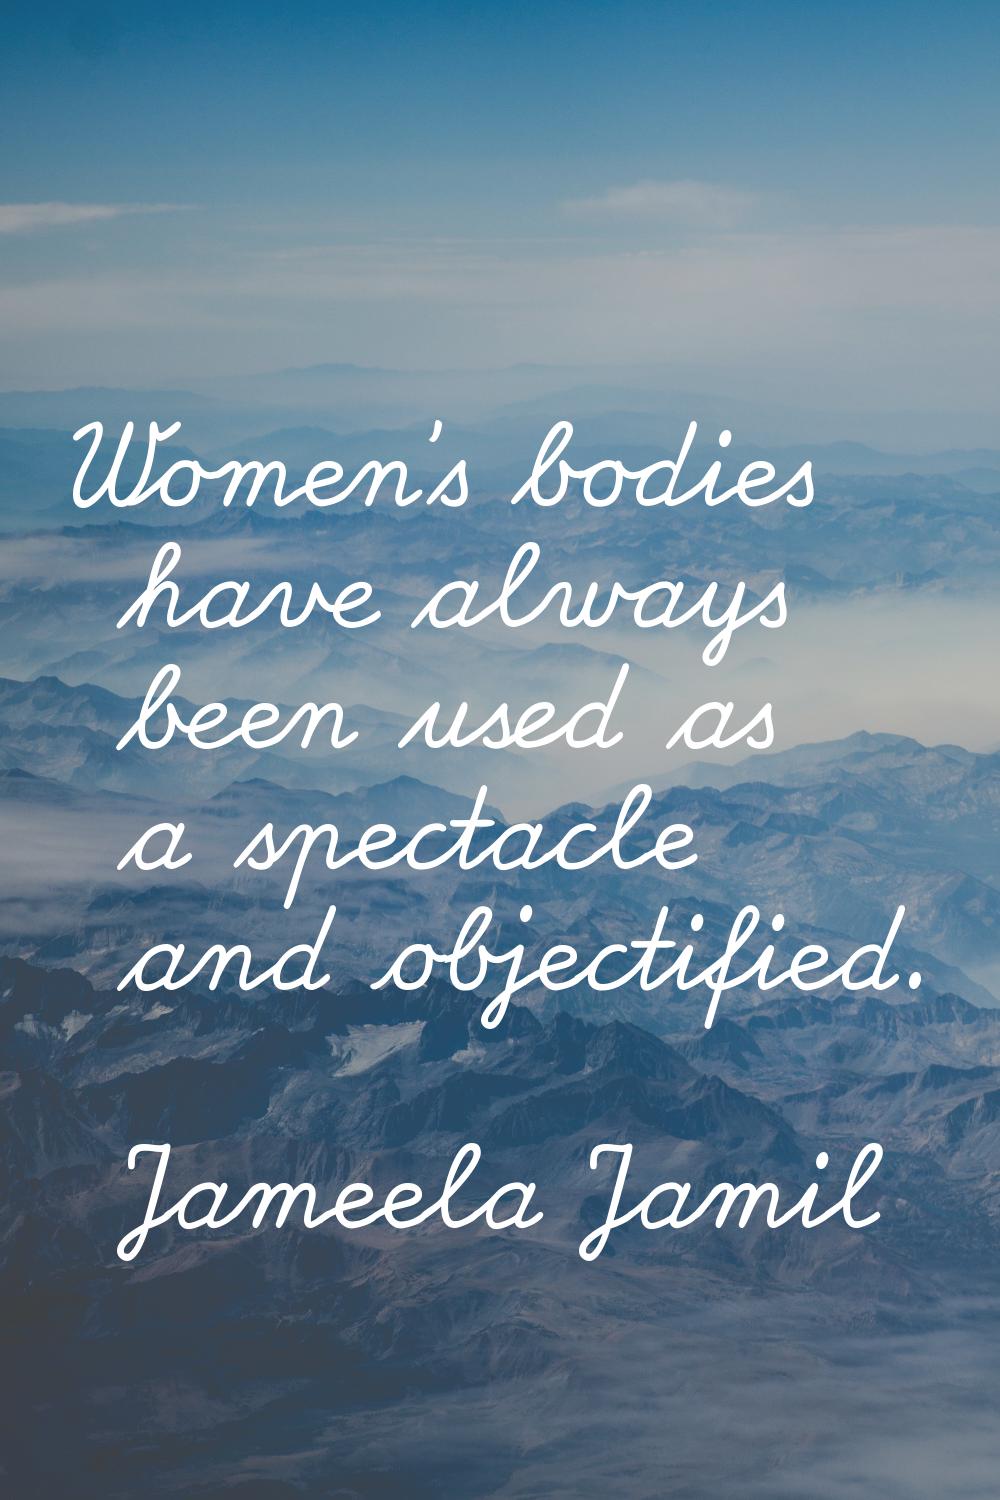 Women's bodies have always been used as a spectacle and objectified.